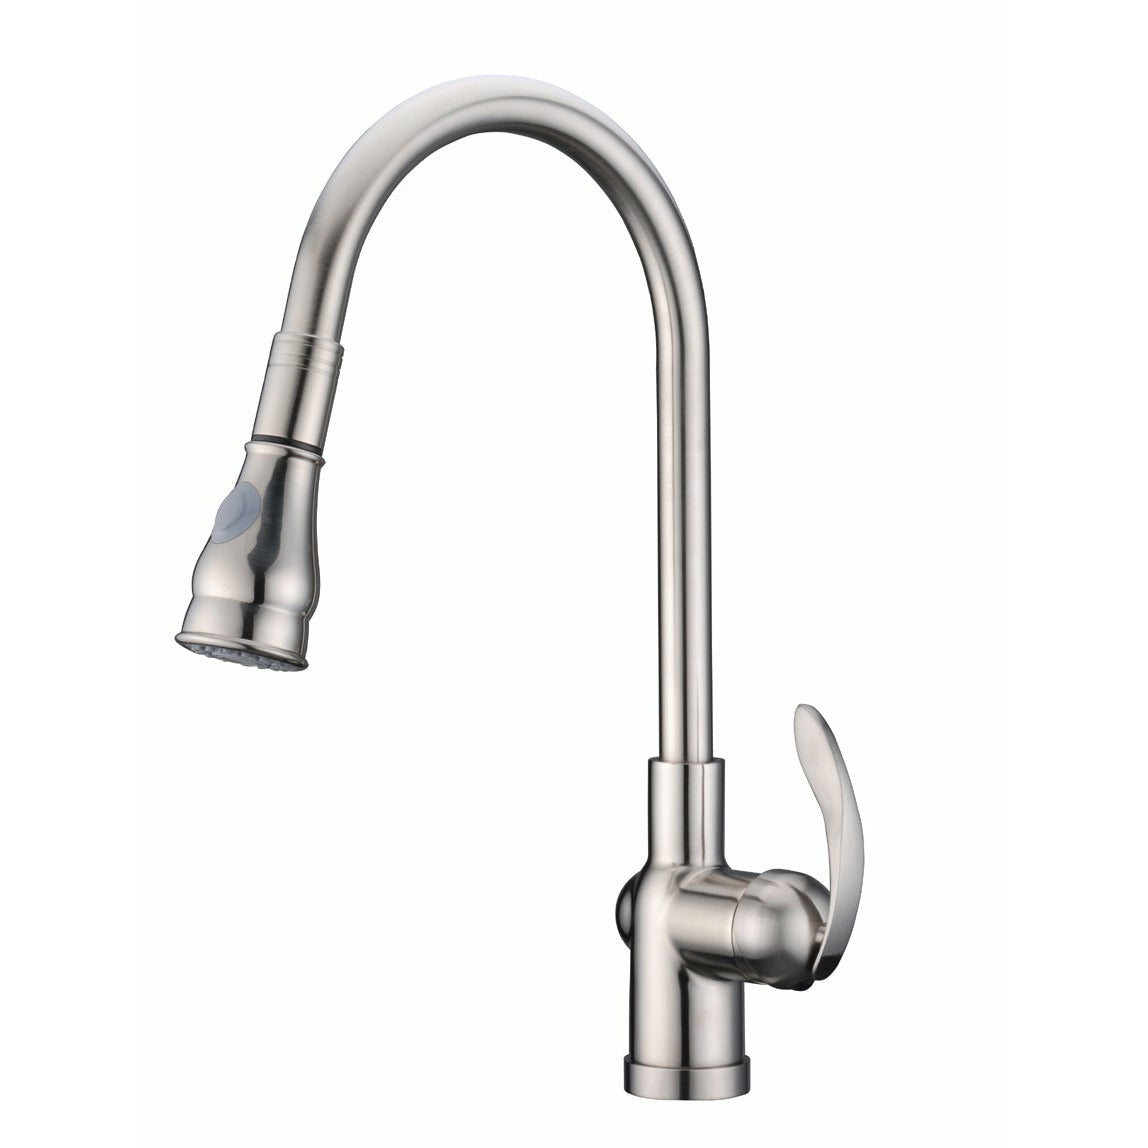 Alpha Goose Neck Pull-Out Faucet Model No. 92-599